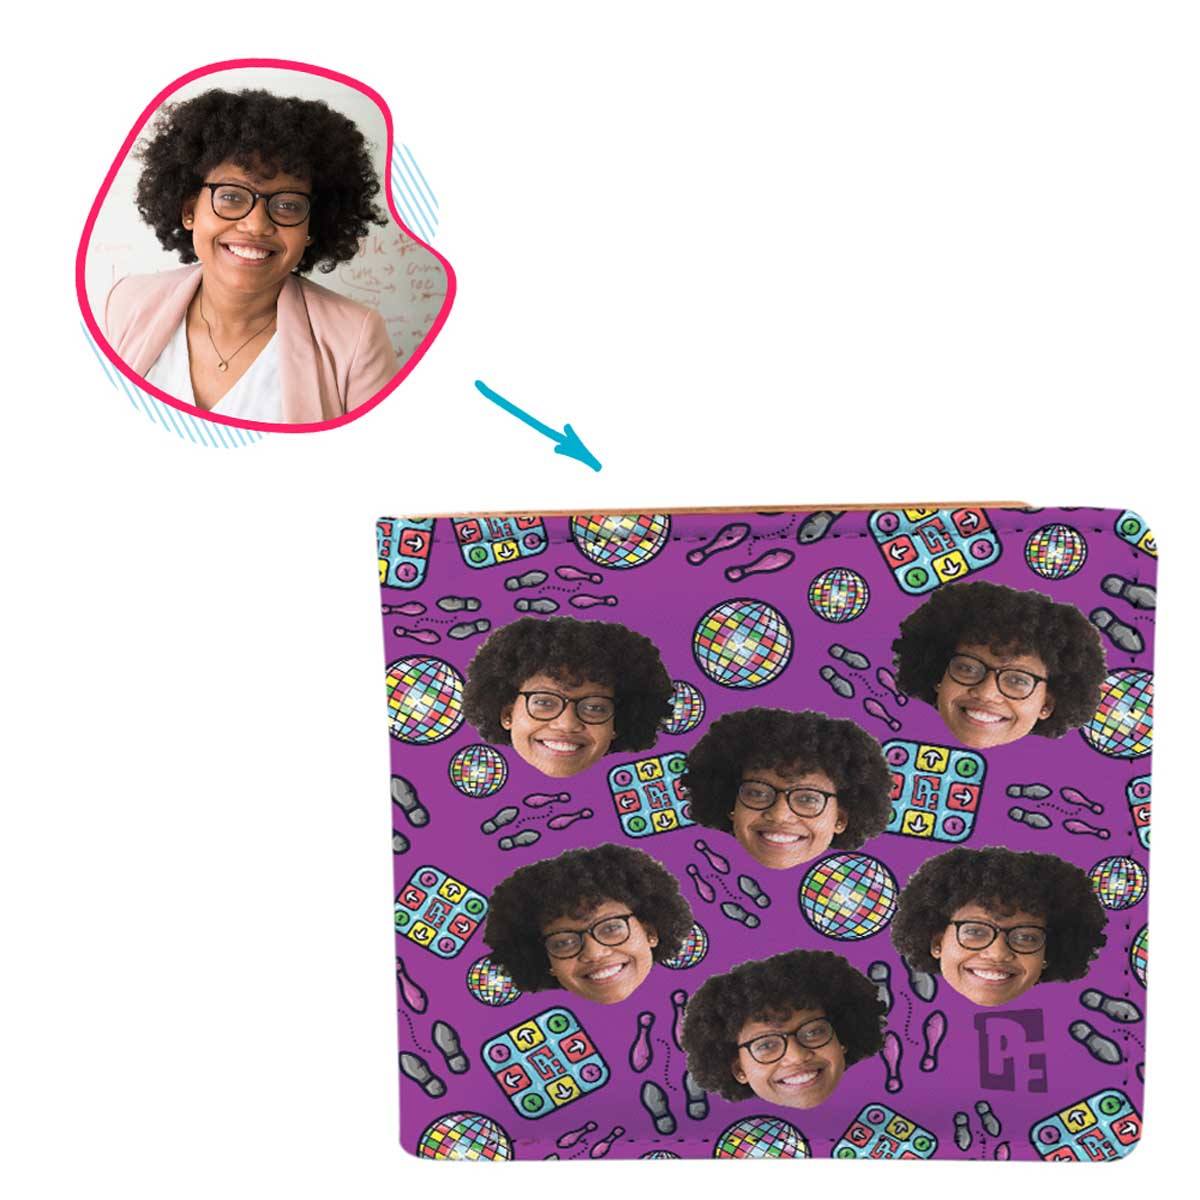 purple Dancing wallet personalized with photo of face printed on it